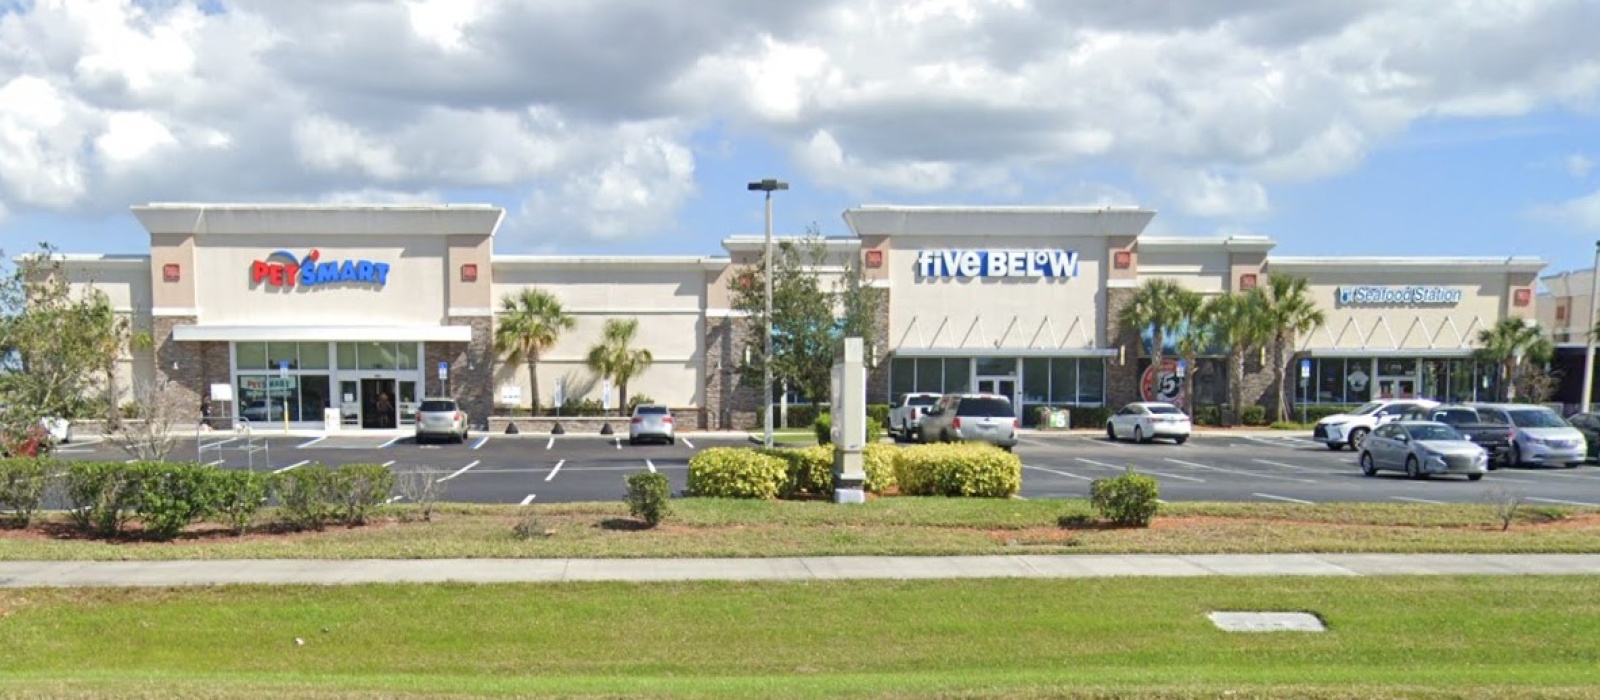 7161 Lake Andrew Drive, Melbourne, Florida 32940, ,Retail,Net Lease,7161 Lake Andrew Drive,1175